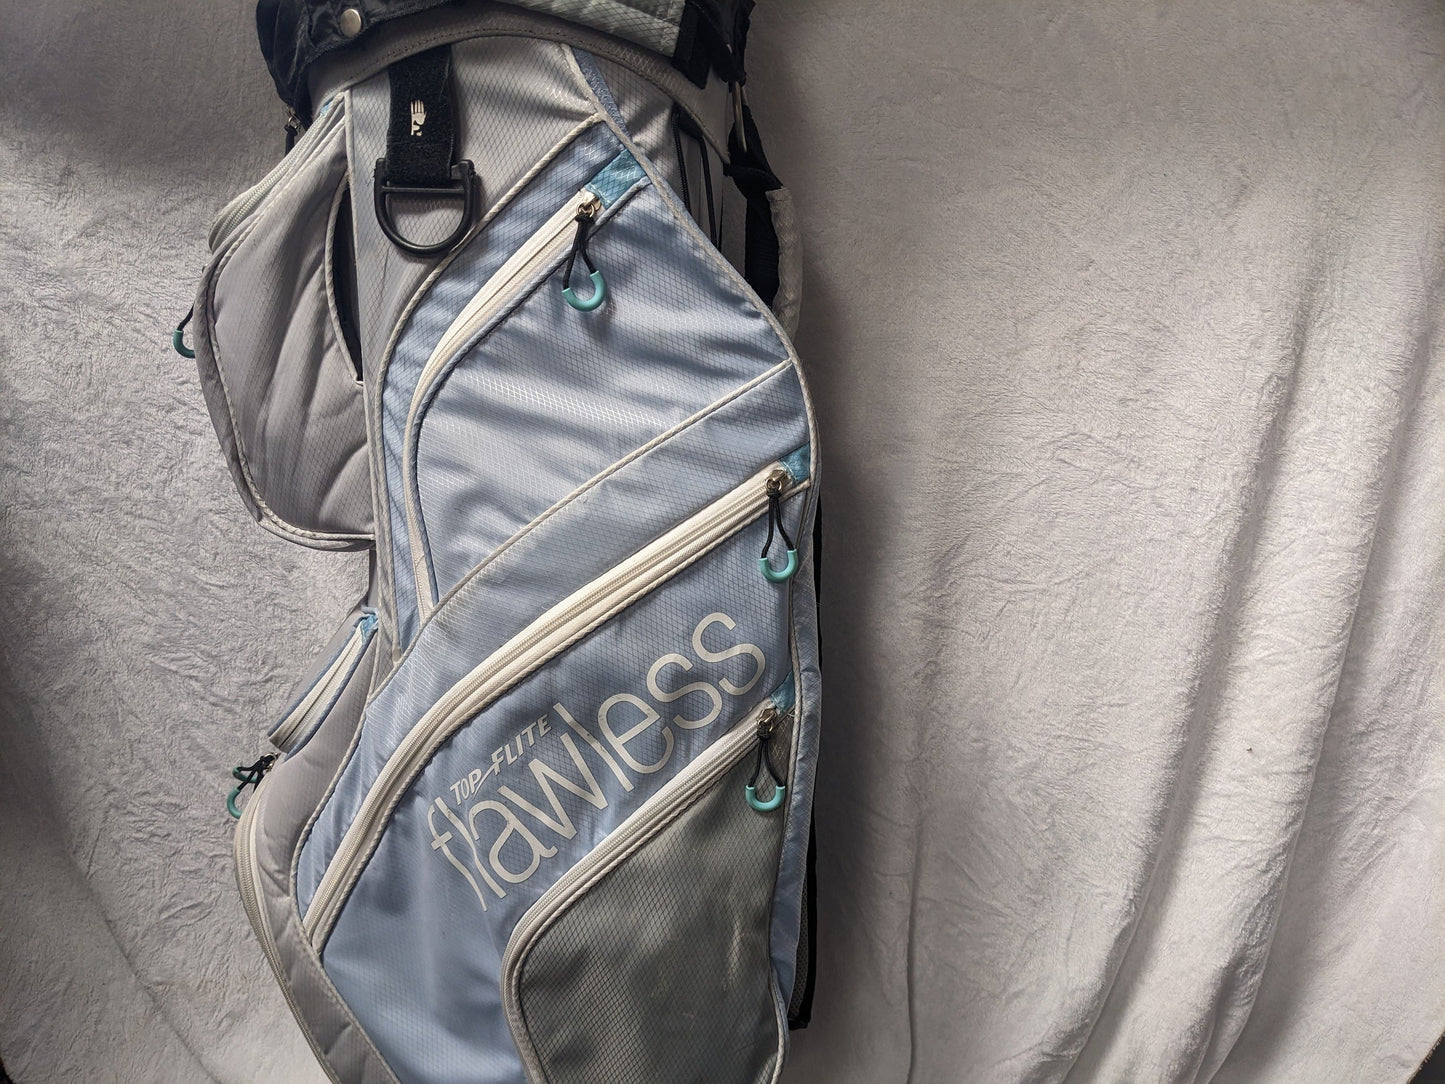 Top Flight Flawless Golf Bag with Taylor Made i7xd Irons and Stealth Drivers Right Hand Golf Set Size Bag + 10 Clubs (No Putter) Color Blue Condition Used